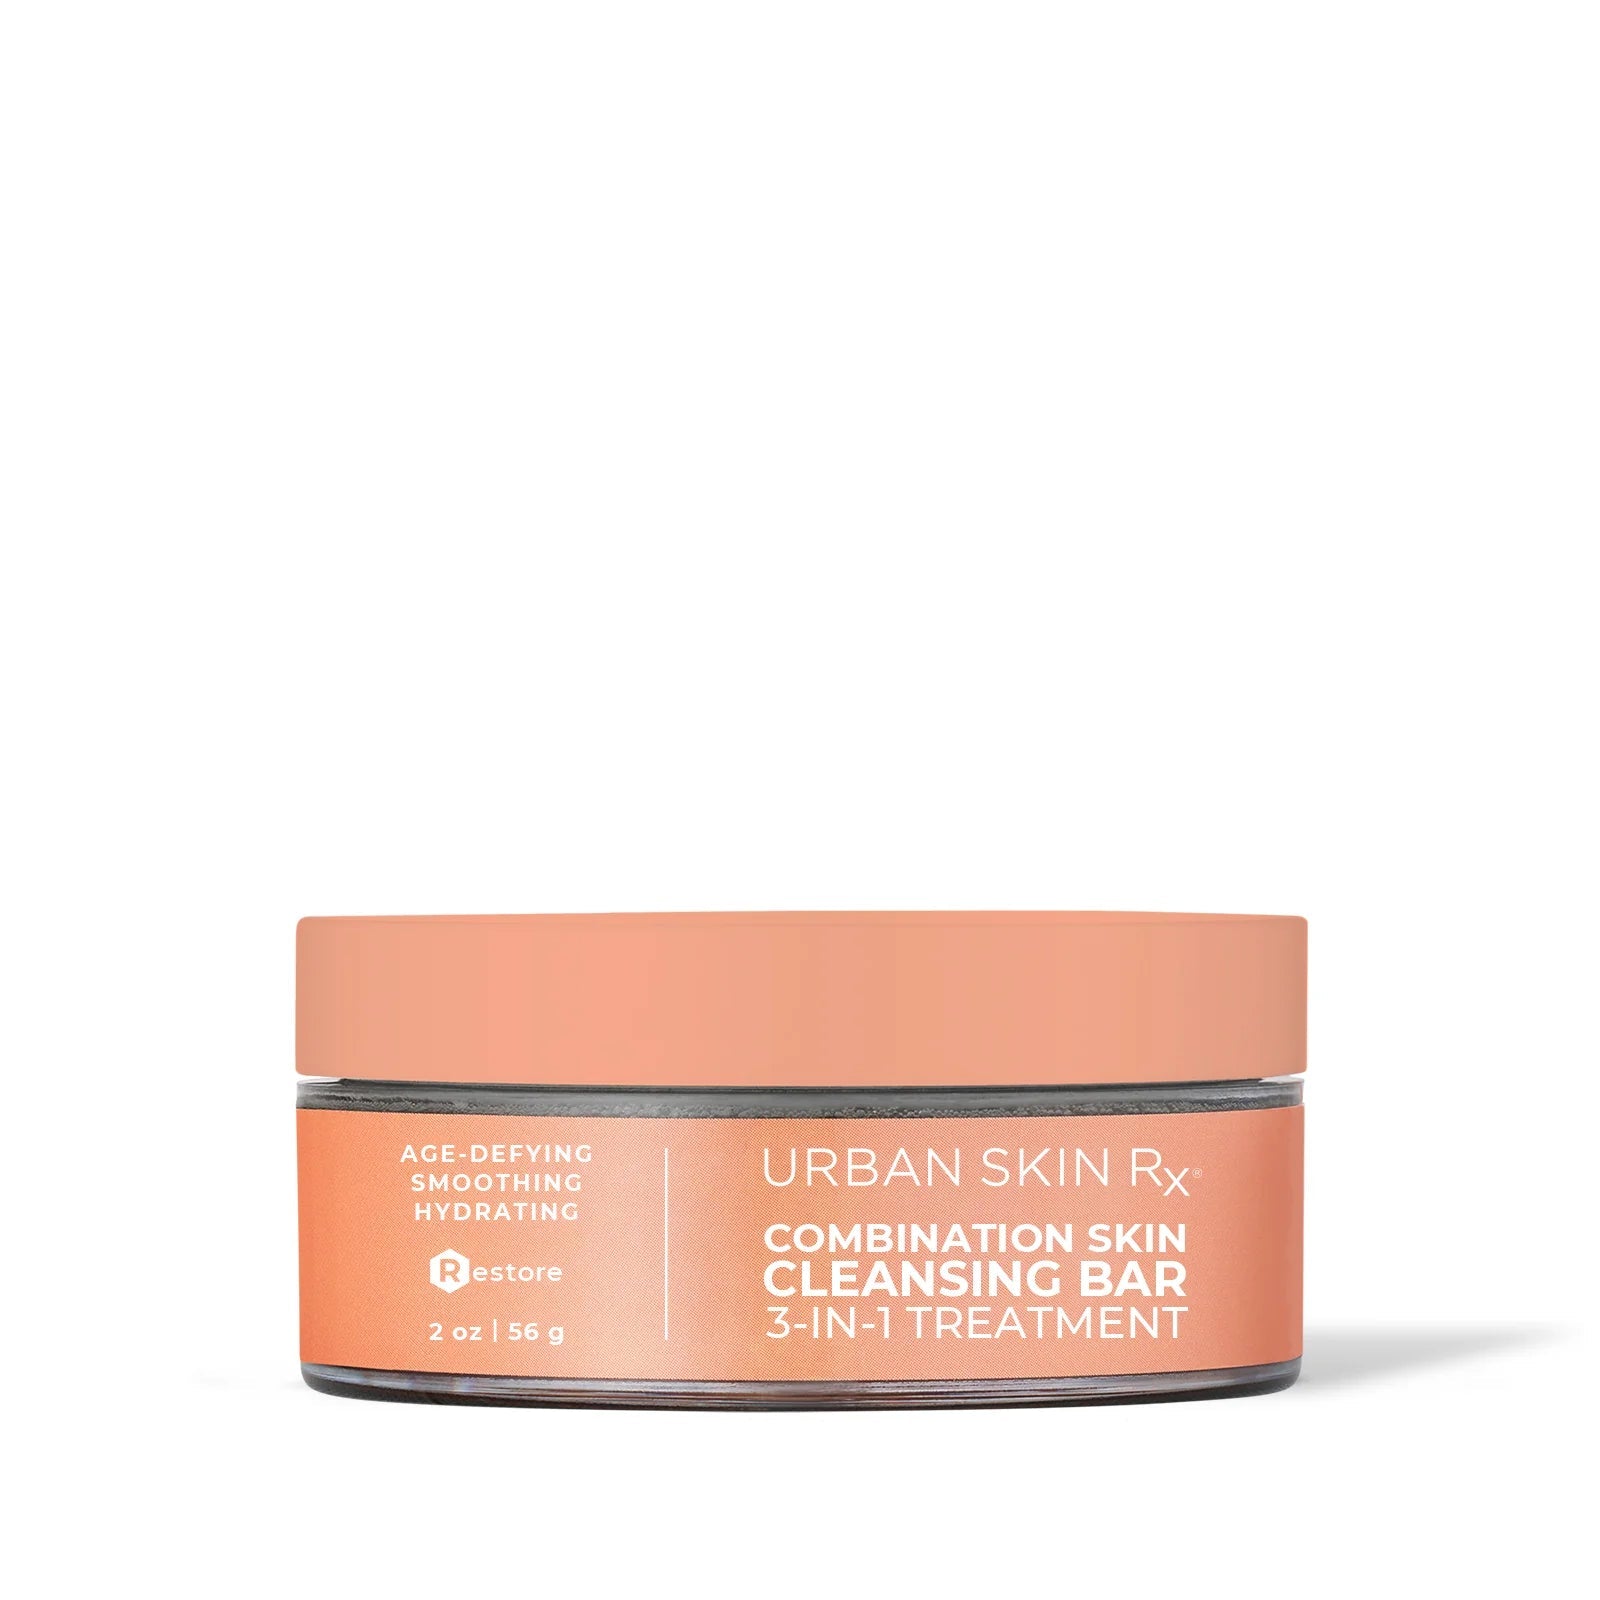 Combination Skin Cleansing Bar